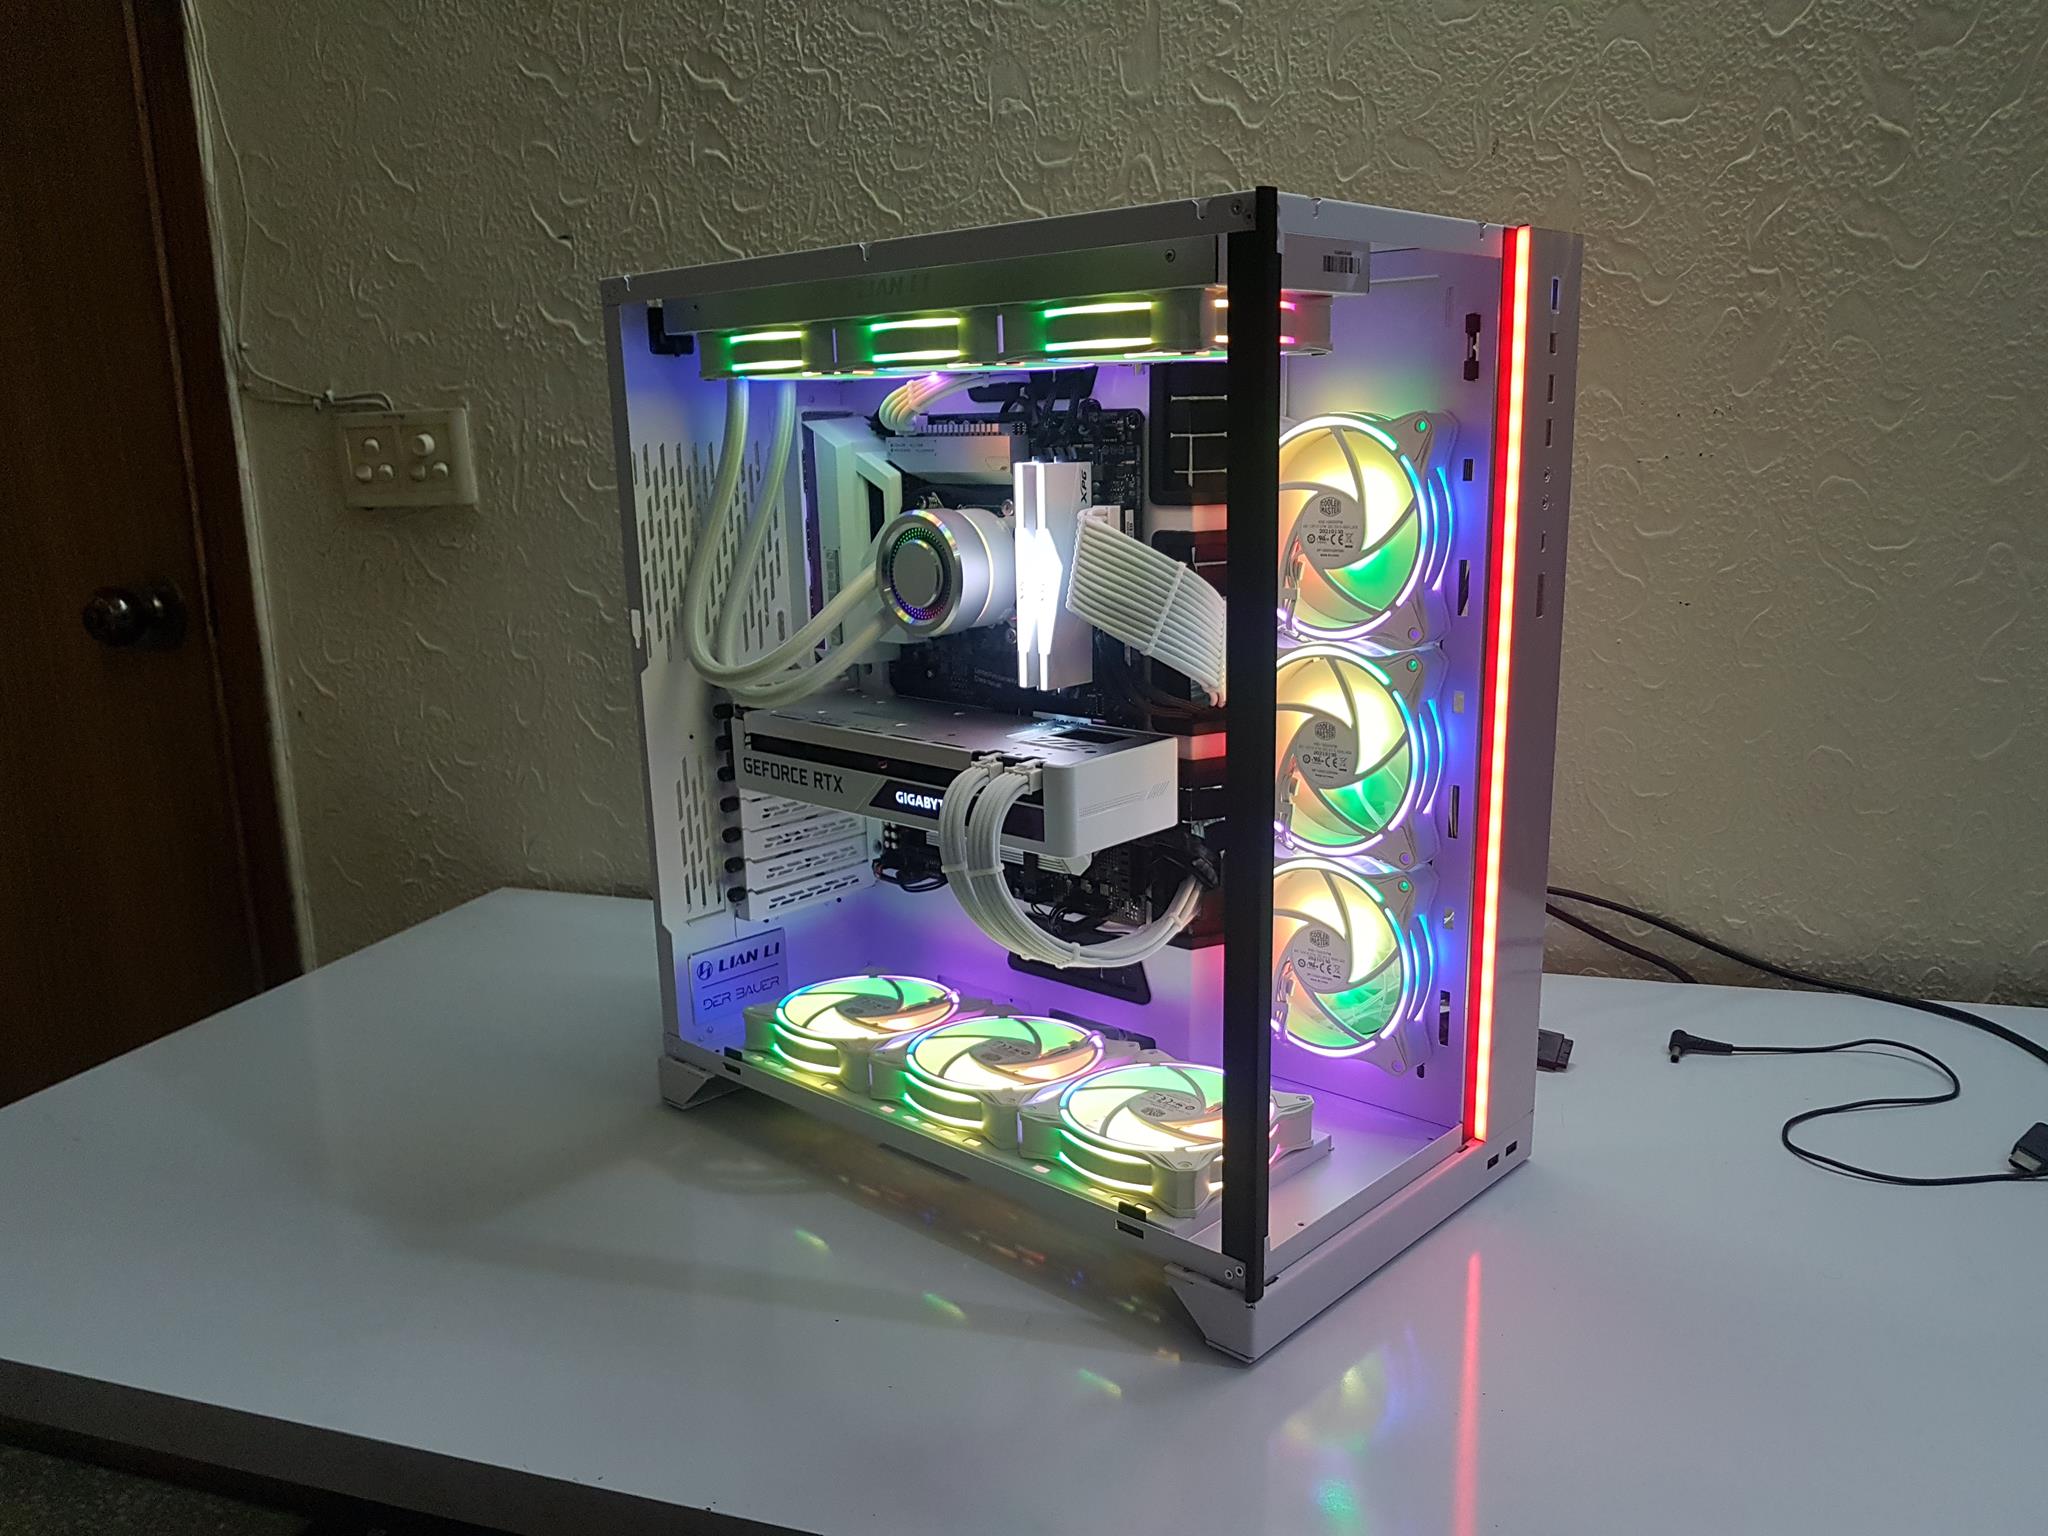 The white PC build after successful POST